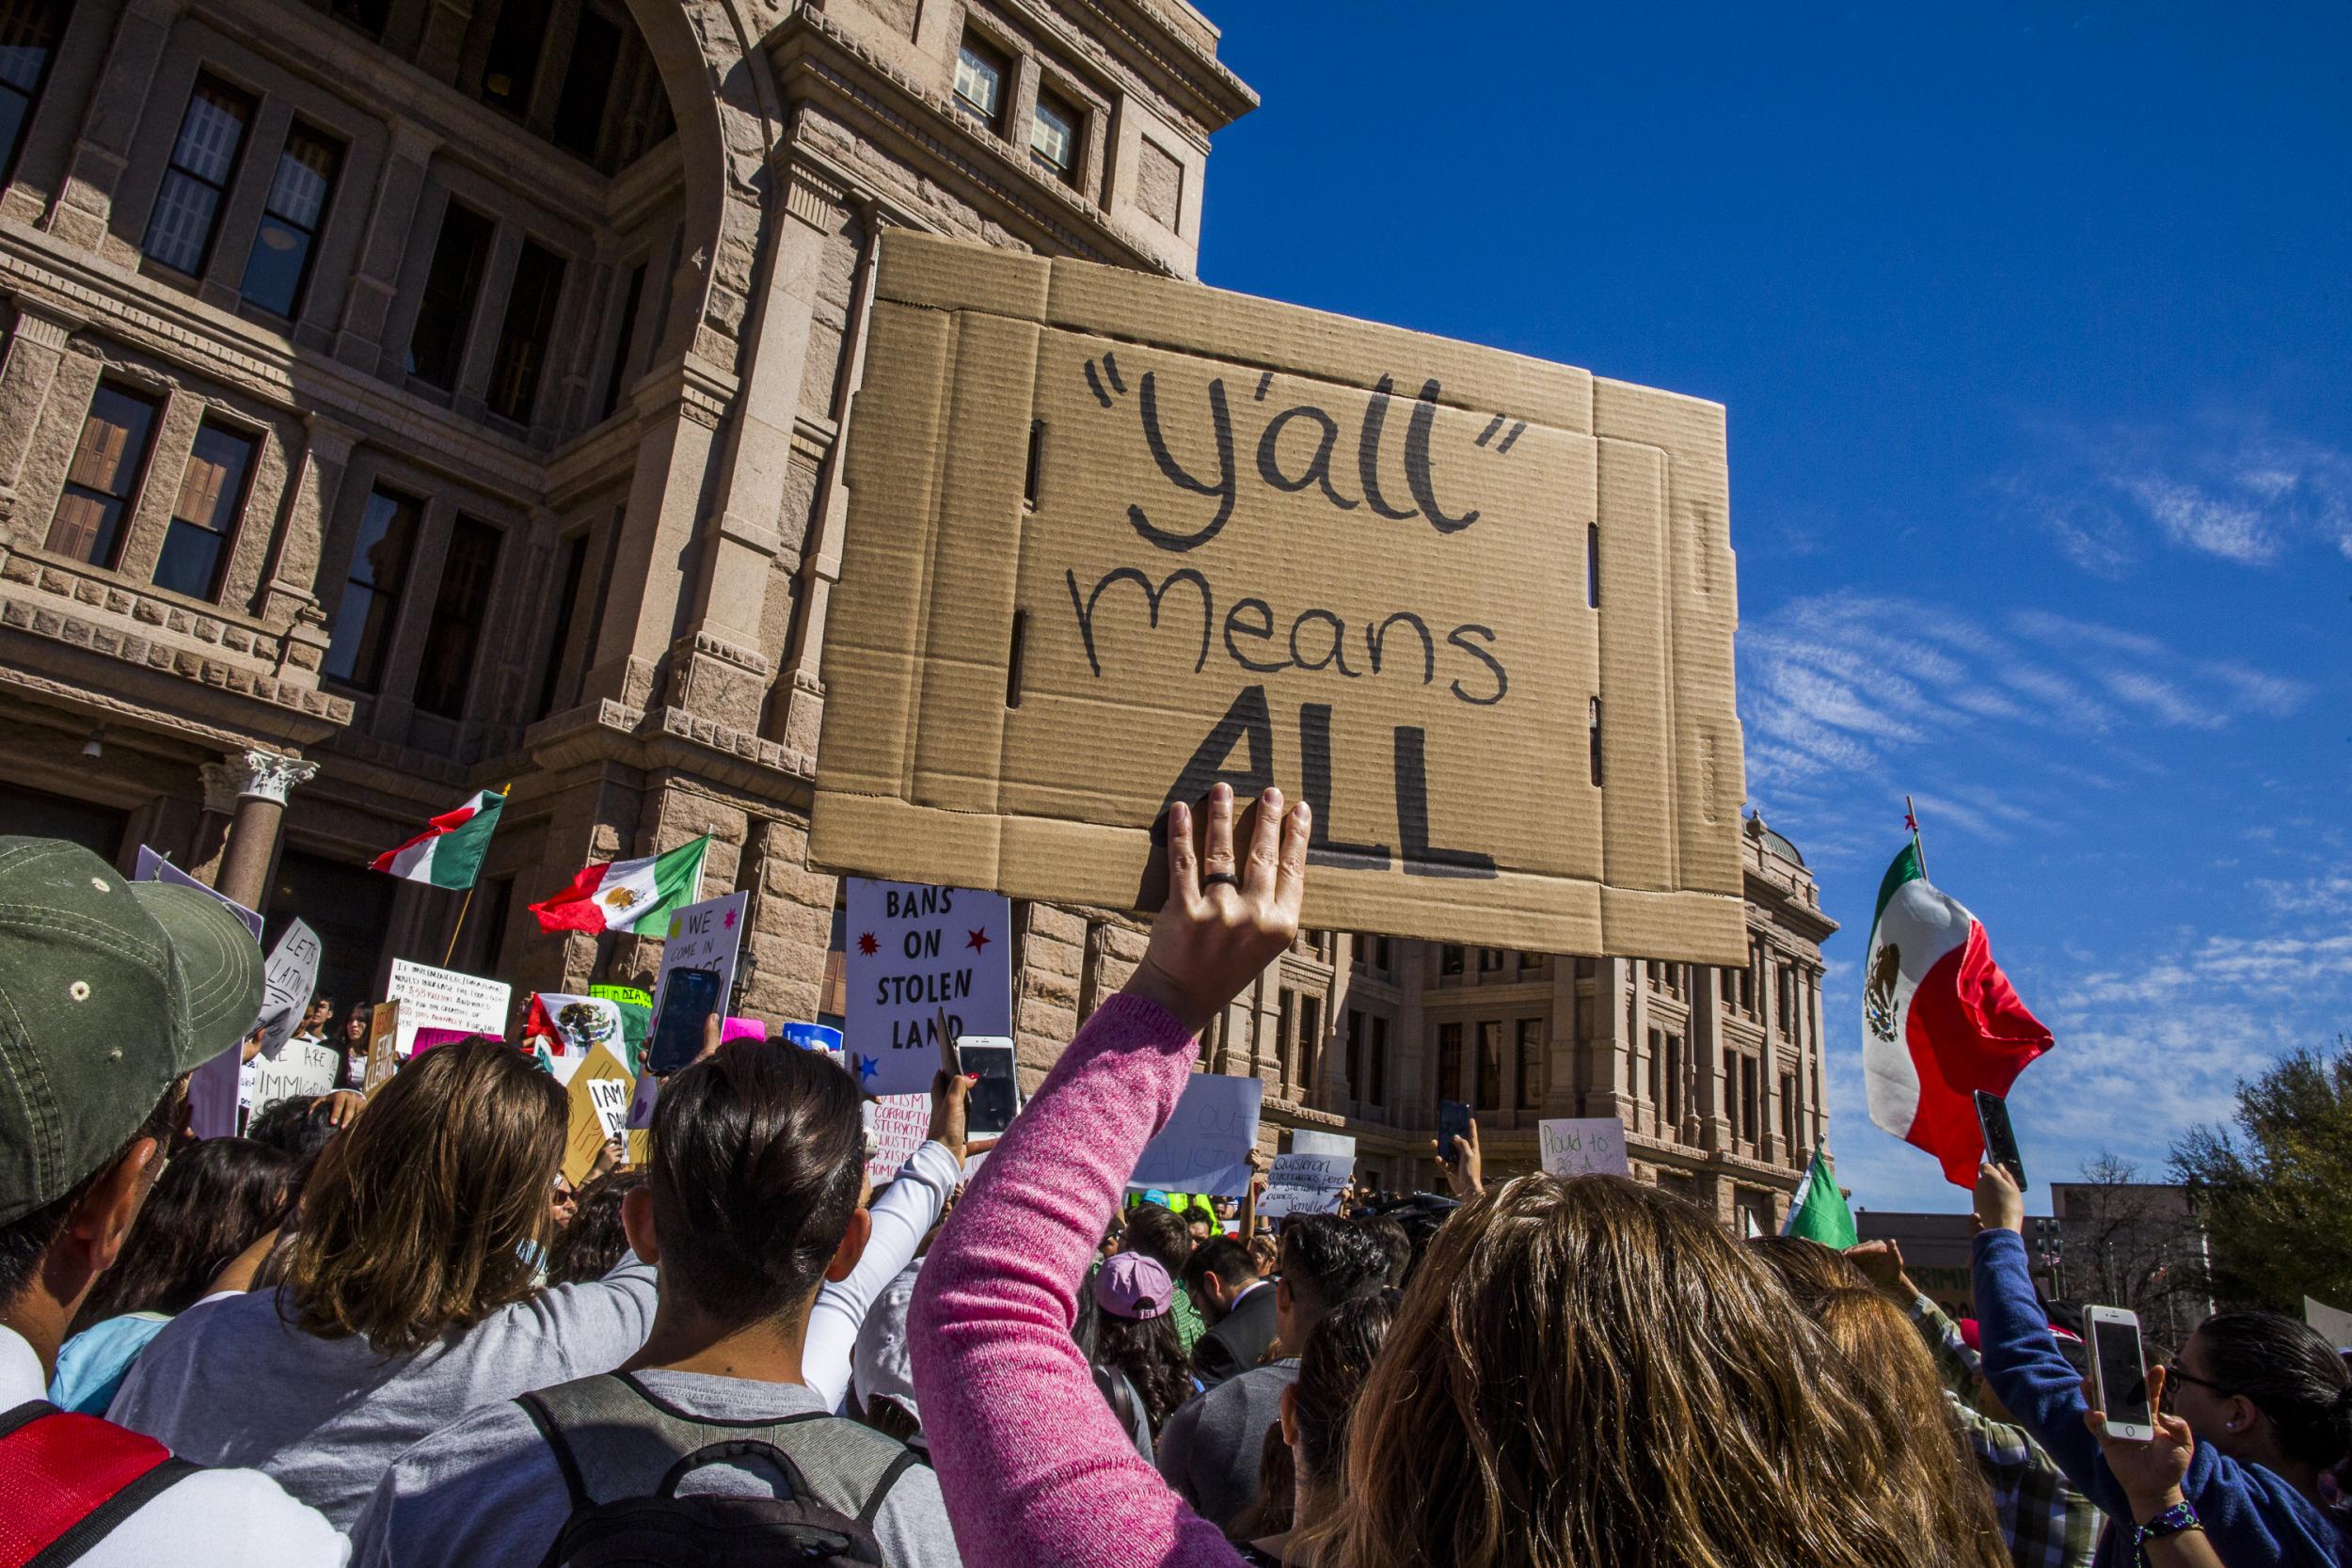 Texas politicians nearly got into a brawl over immigration protests